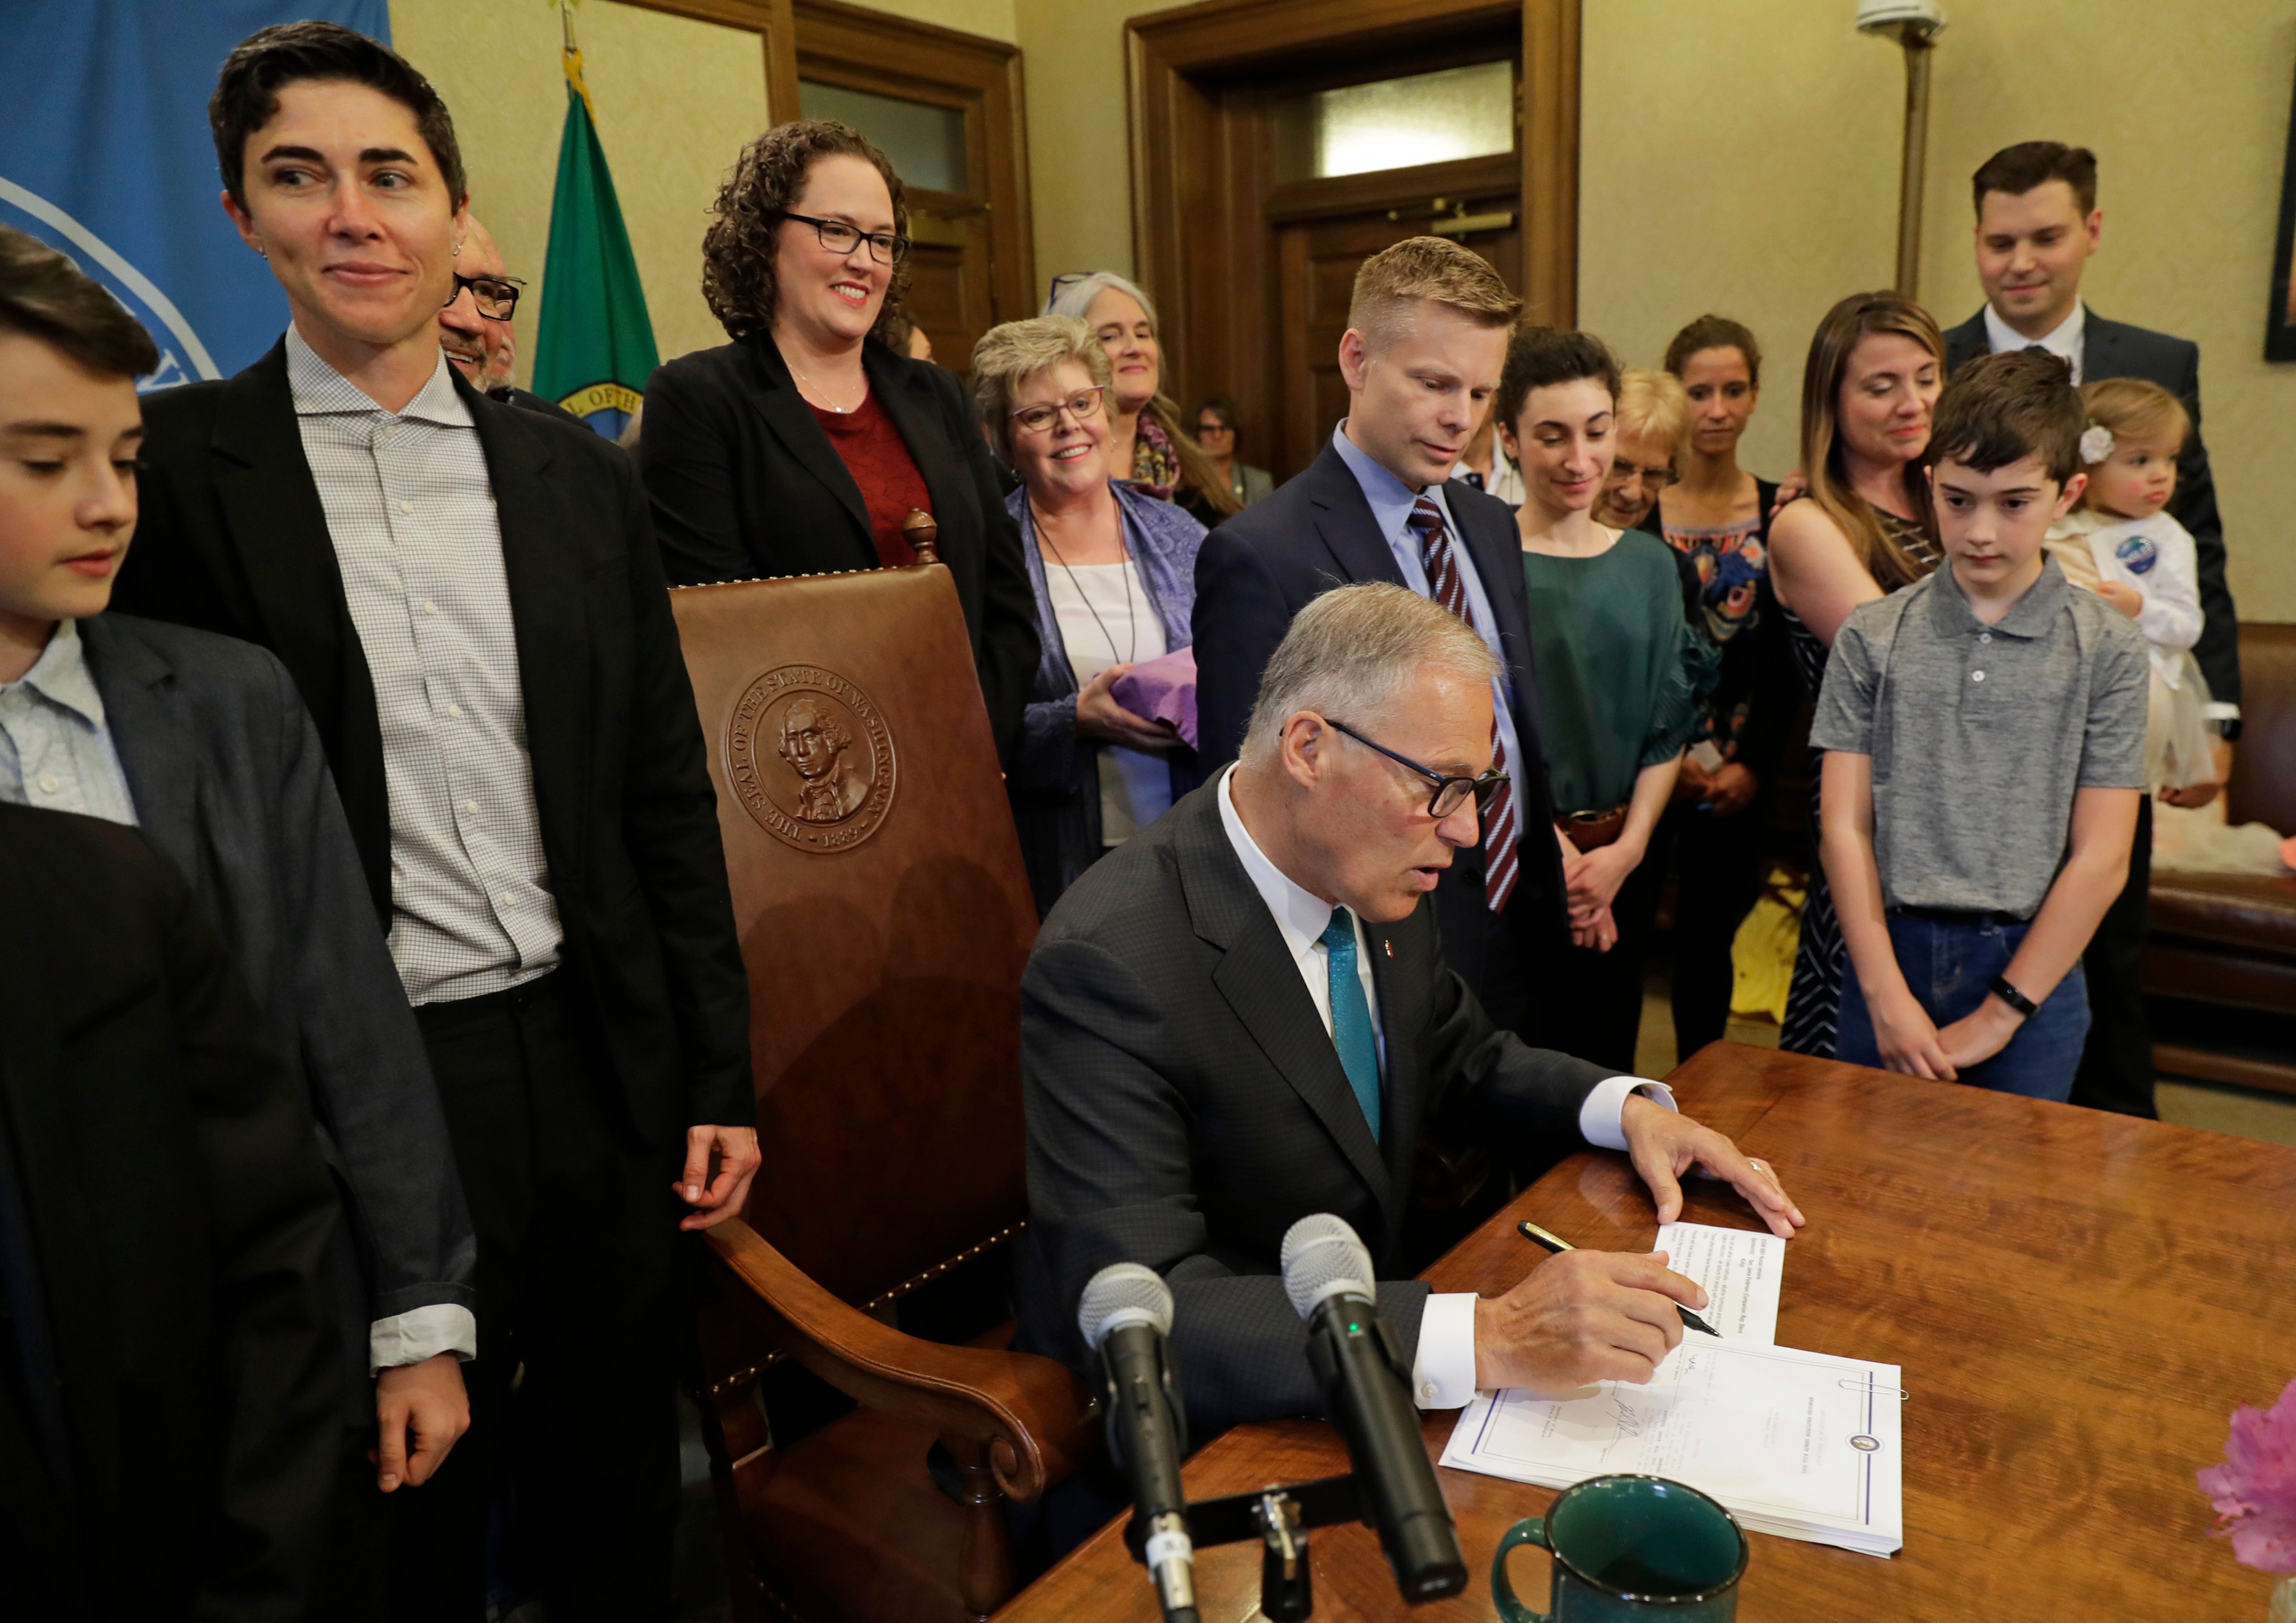 Katrina Spade, upper left, the founder and CEO of Recompose, looks on May 21, 2019, as Washington Gov. Jay Inslee, center, signs a bill into law that allows licensed facilities to offer 'human composting' services. (Ted S. Warren/AP)